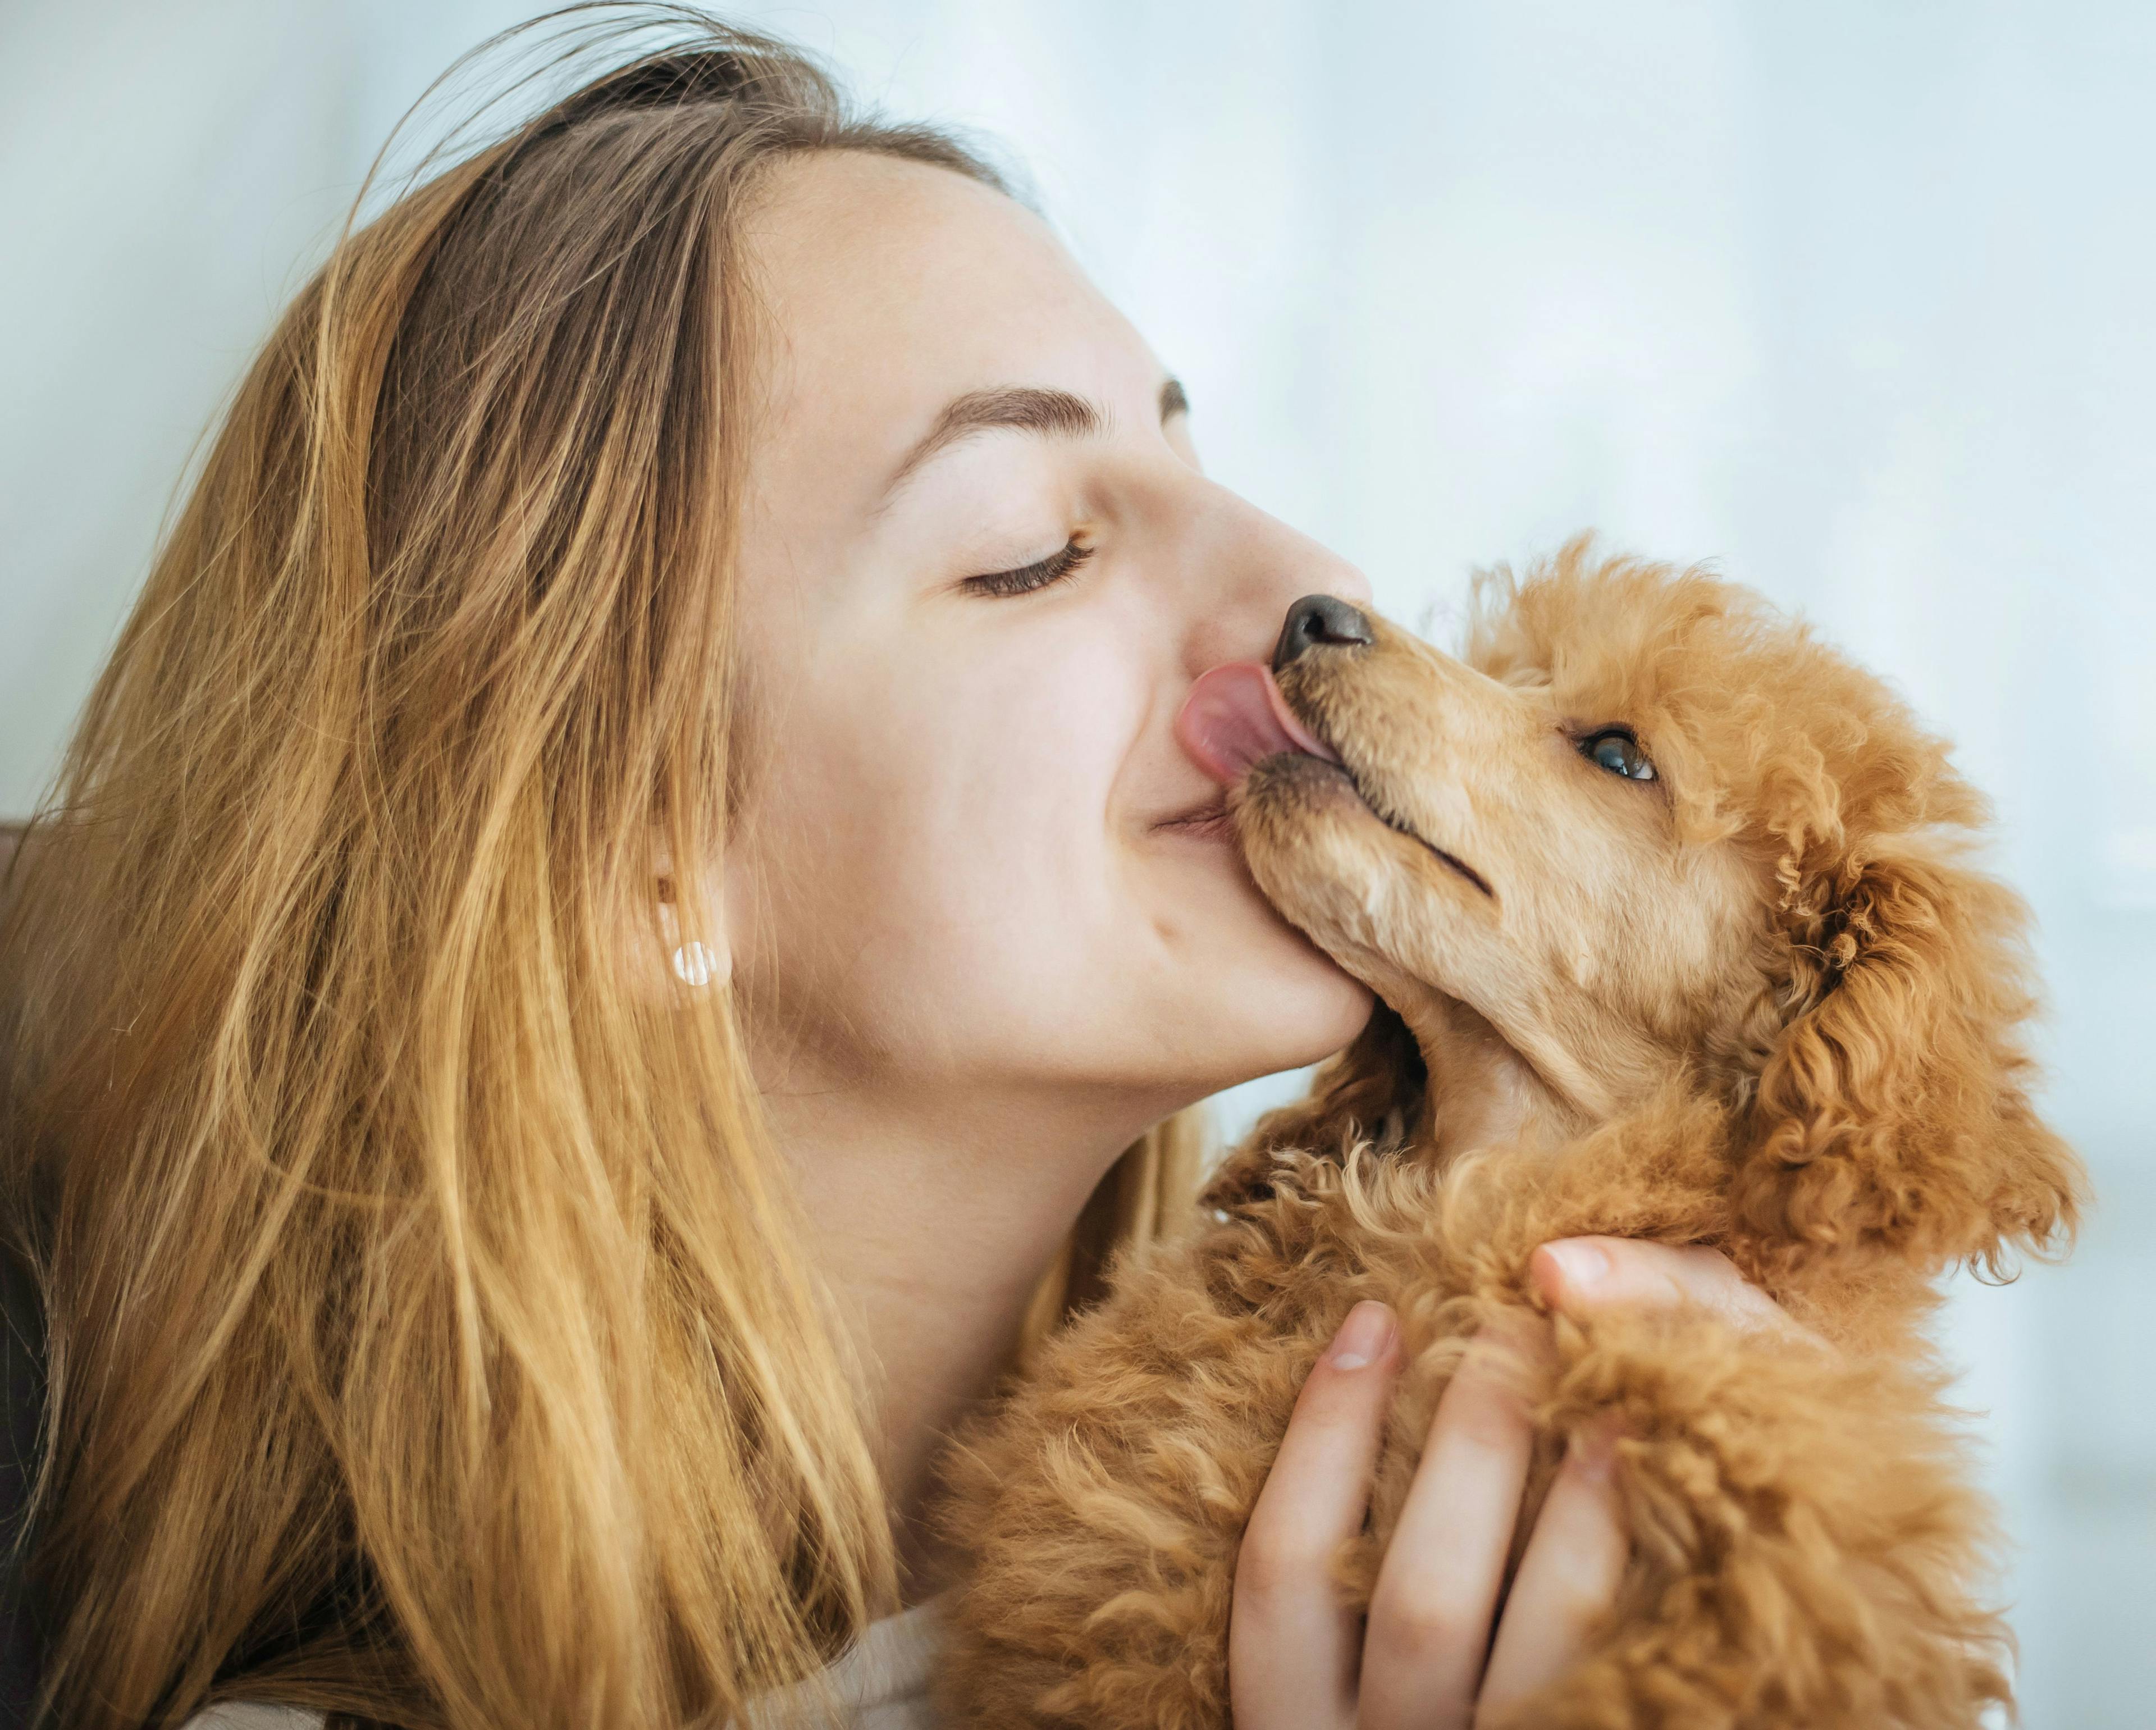 Survey unveils new insights on saying goodbye to pets